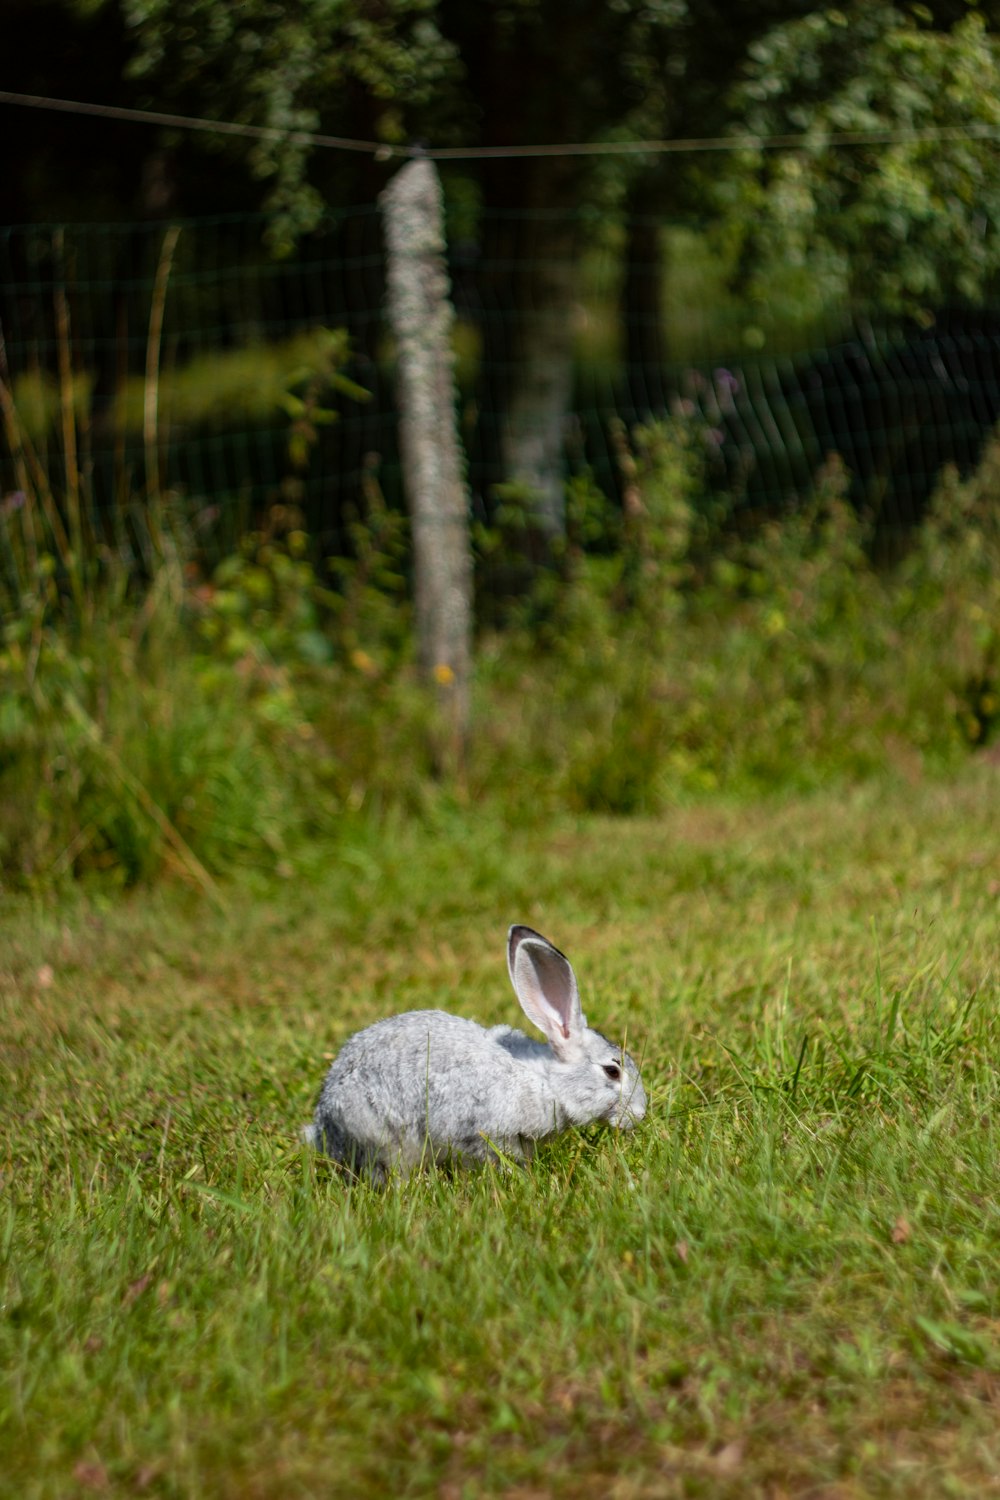 a rabbit sitting in the grass near a fence